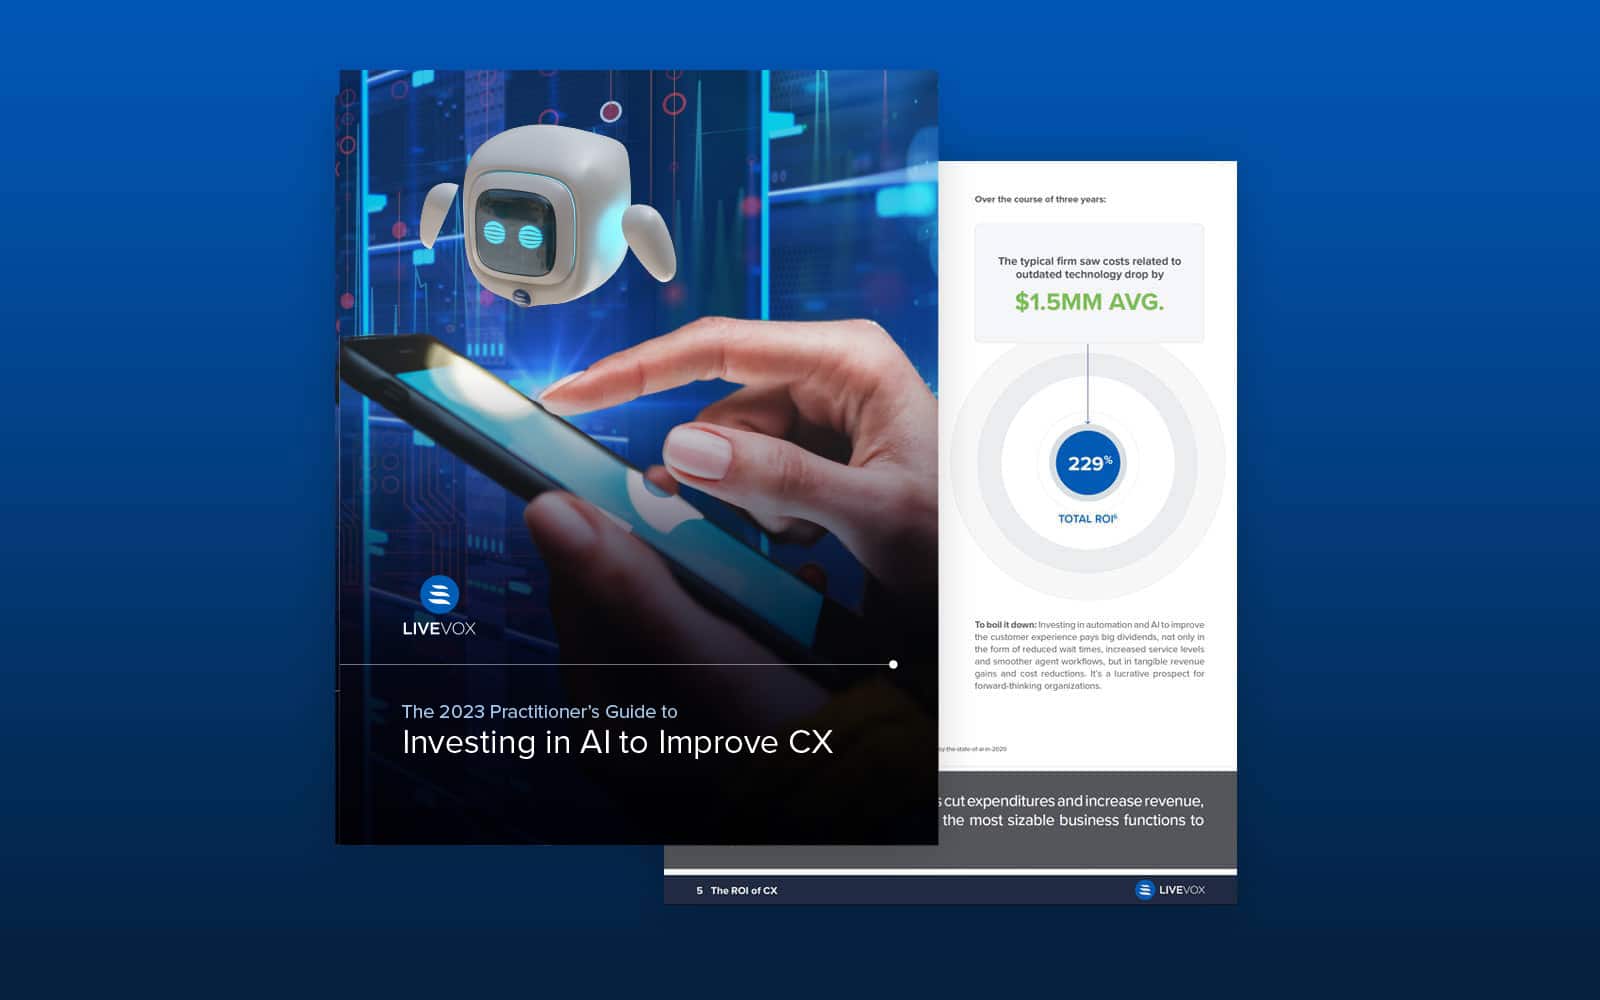 Guide to Investing in AI to improve CX